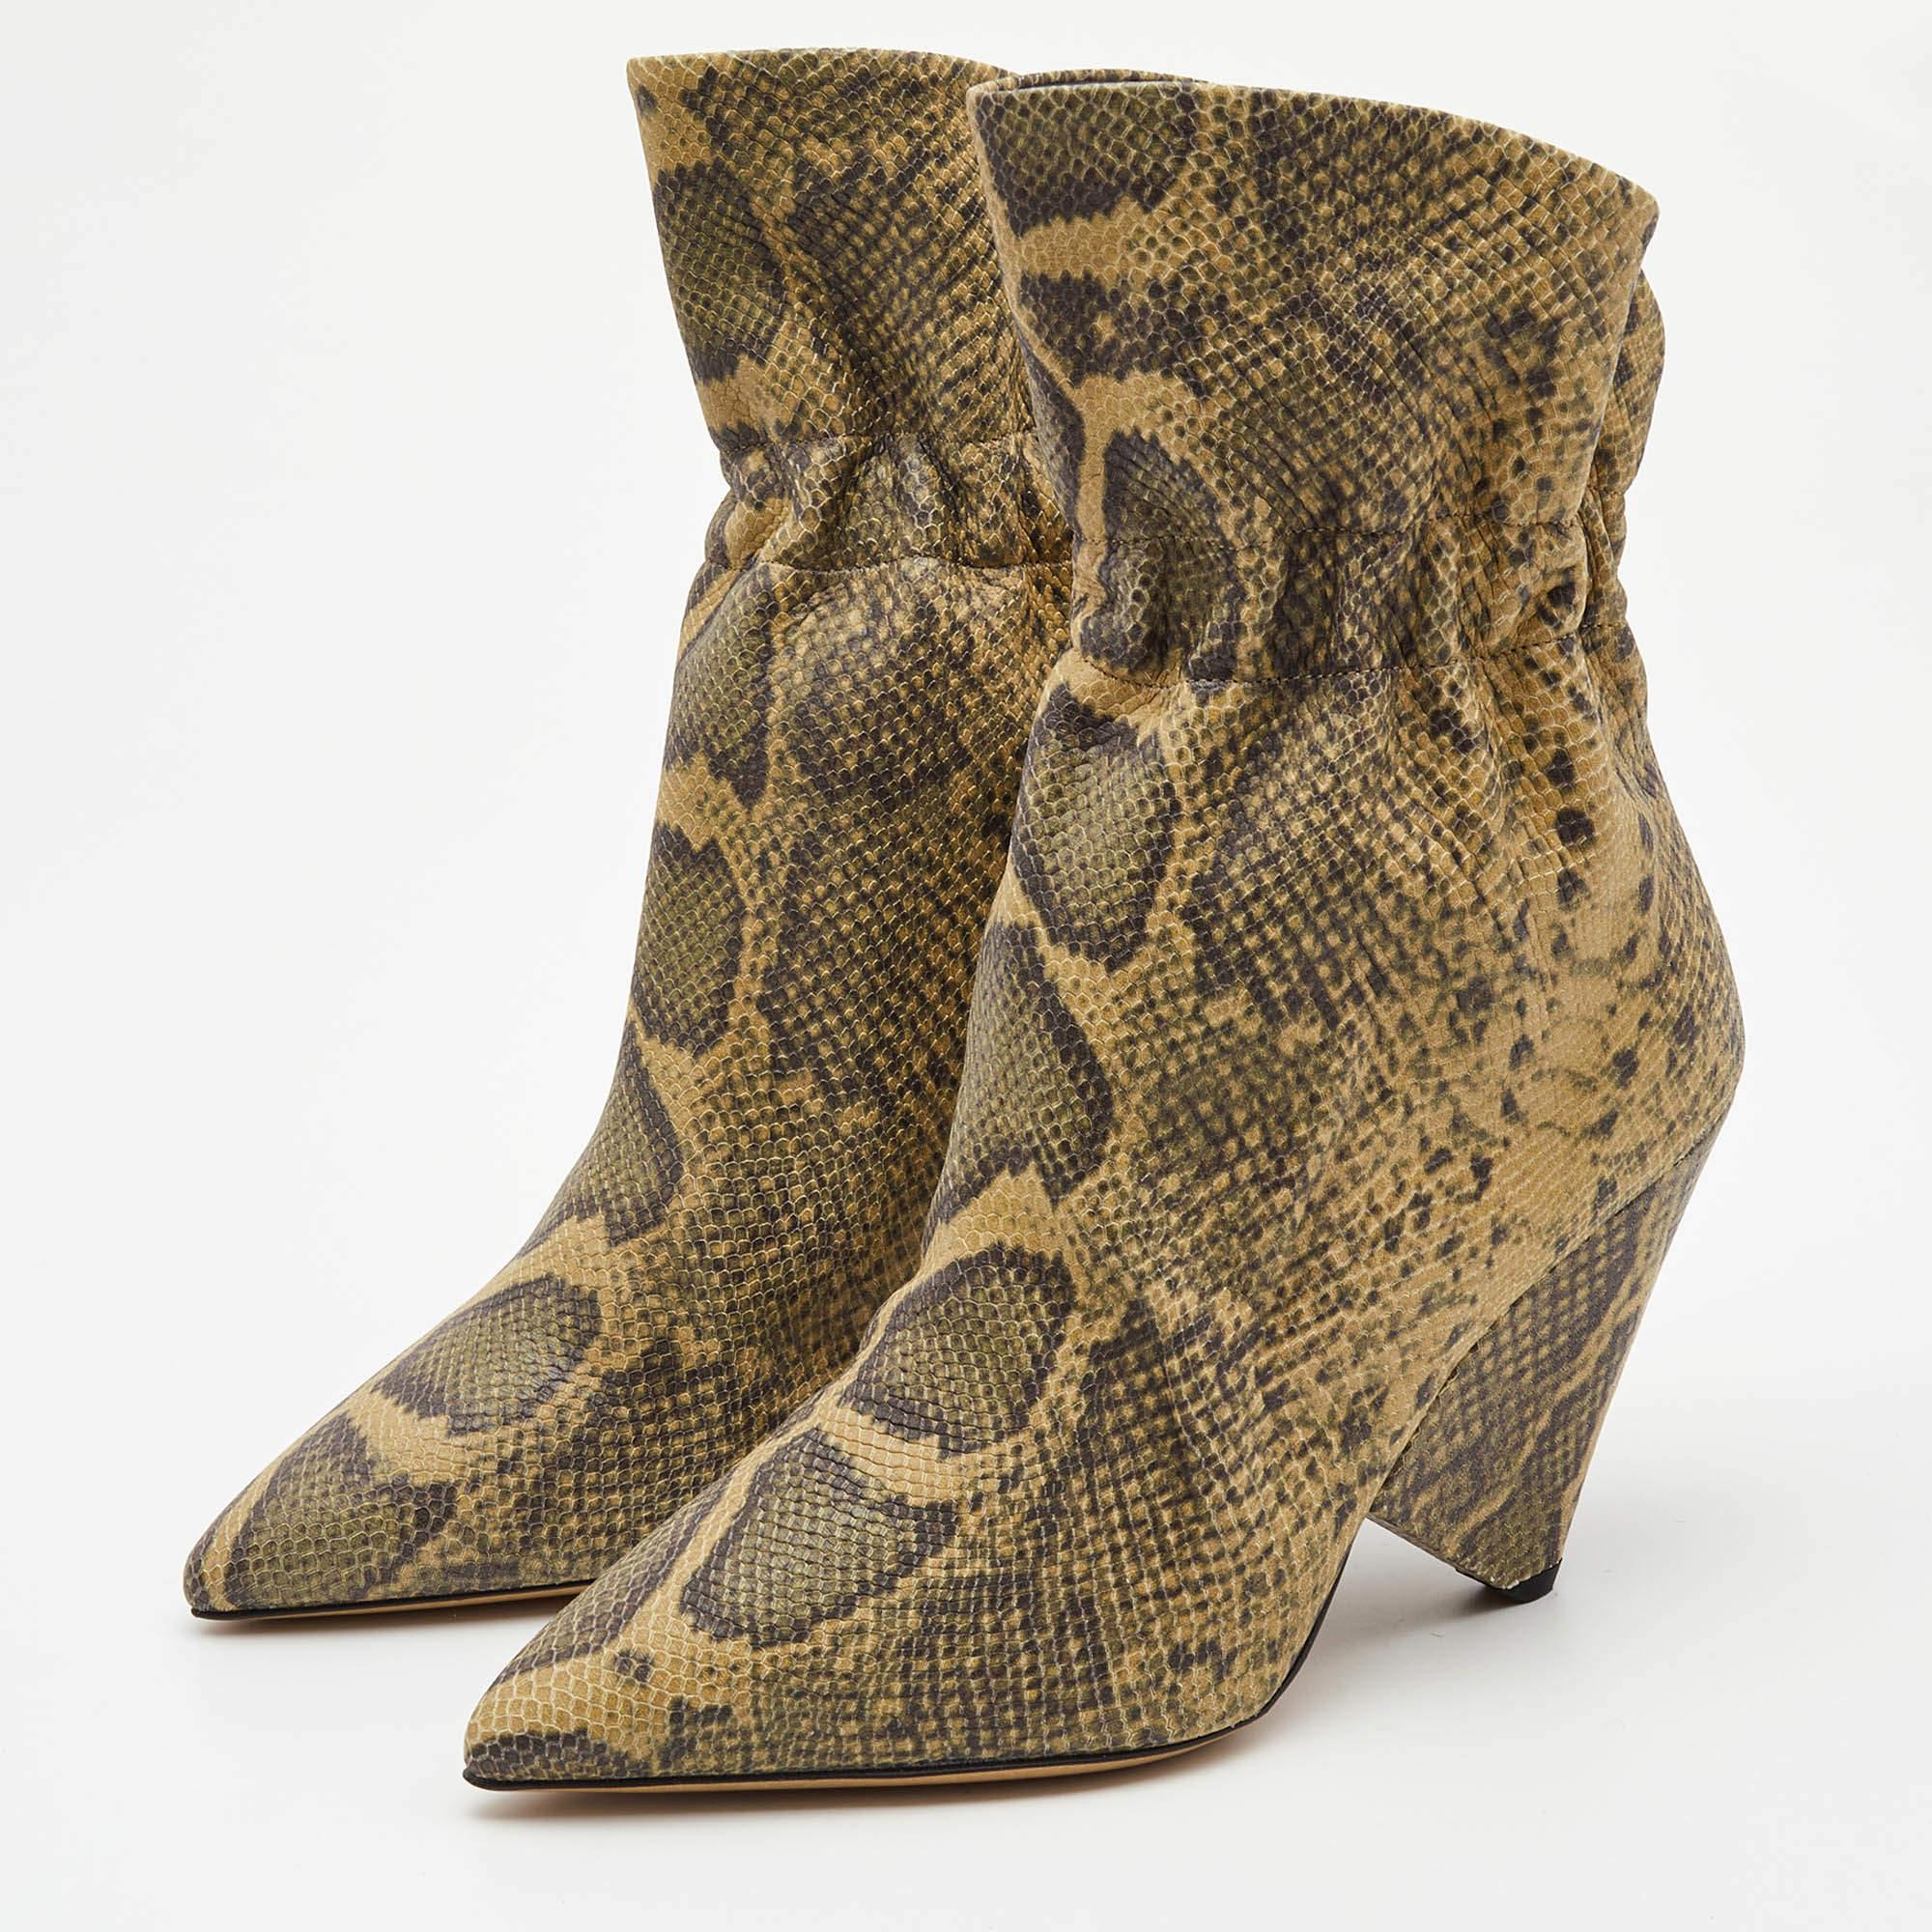 Isabel Marant Two Tone Python Embossed Leather Ankle Booties Size 38 2